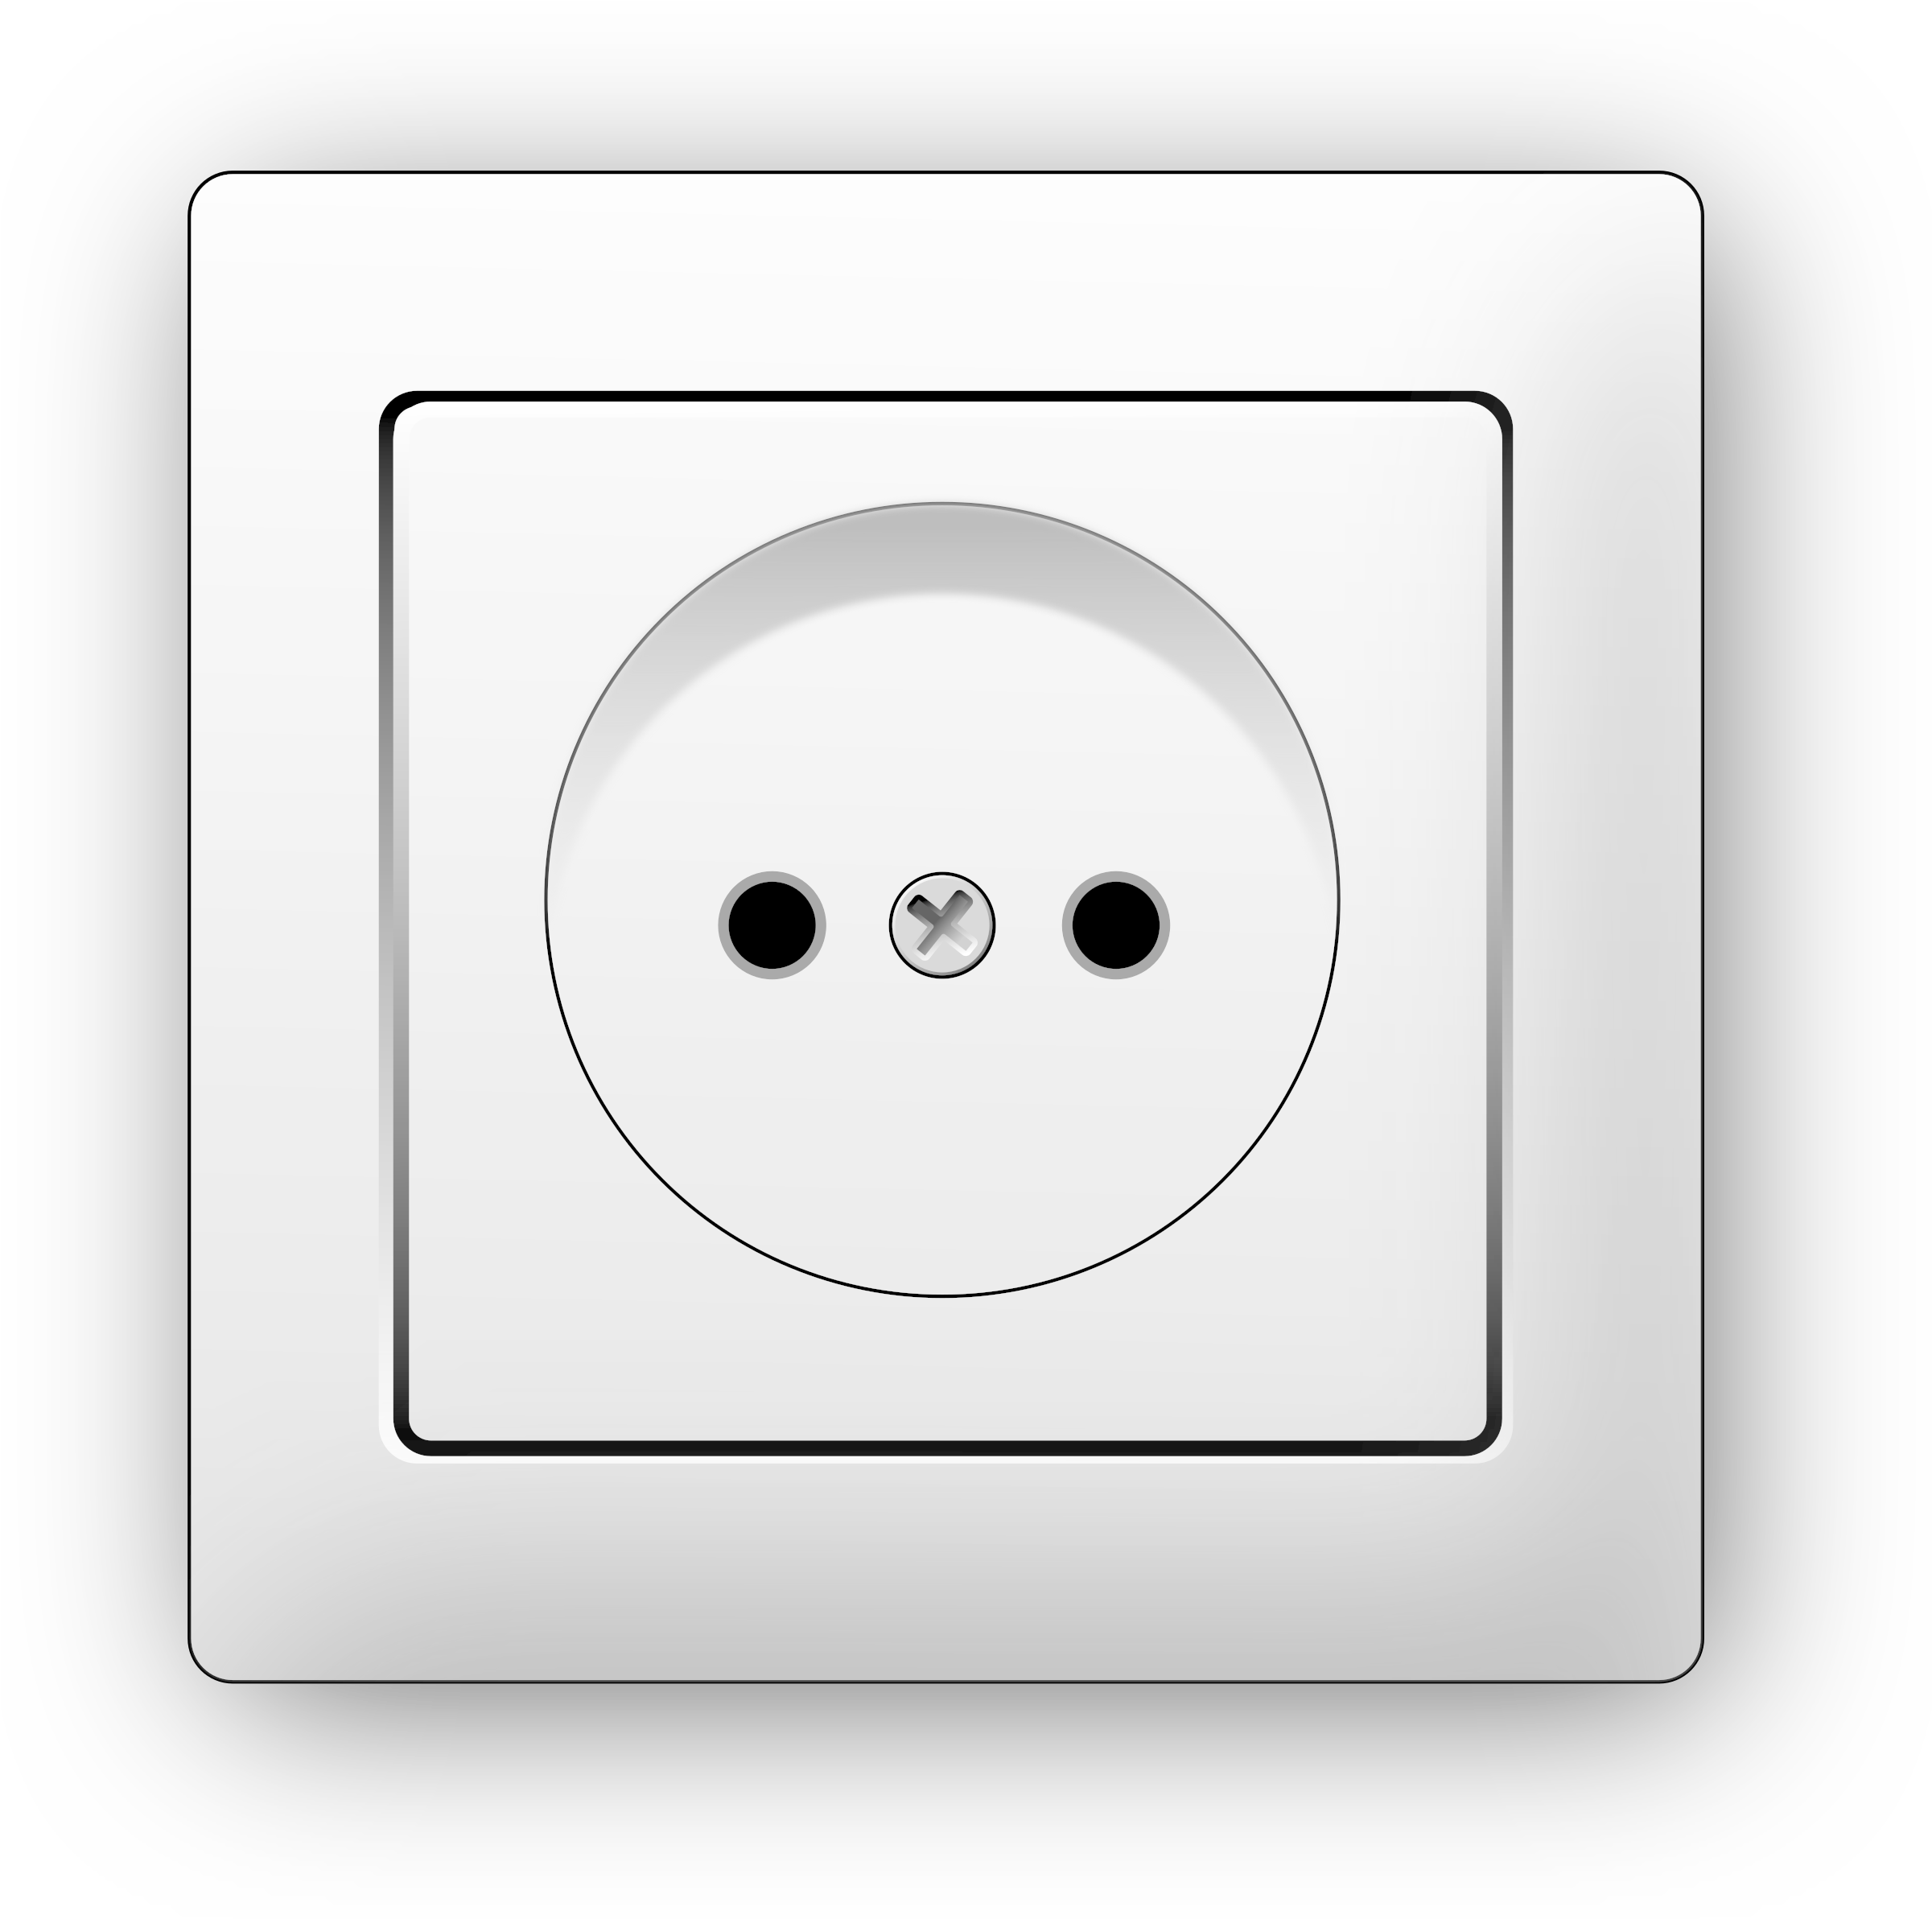 Outlet Png 2401 X 2385